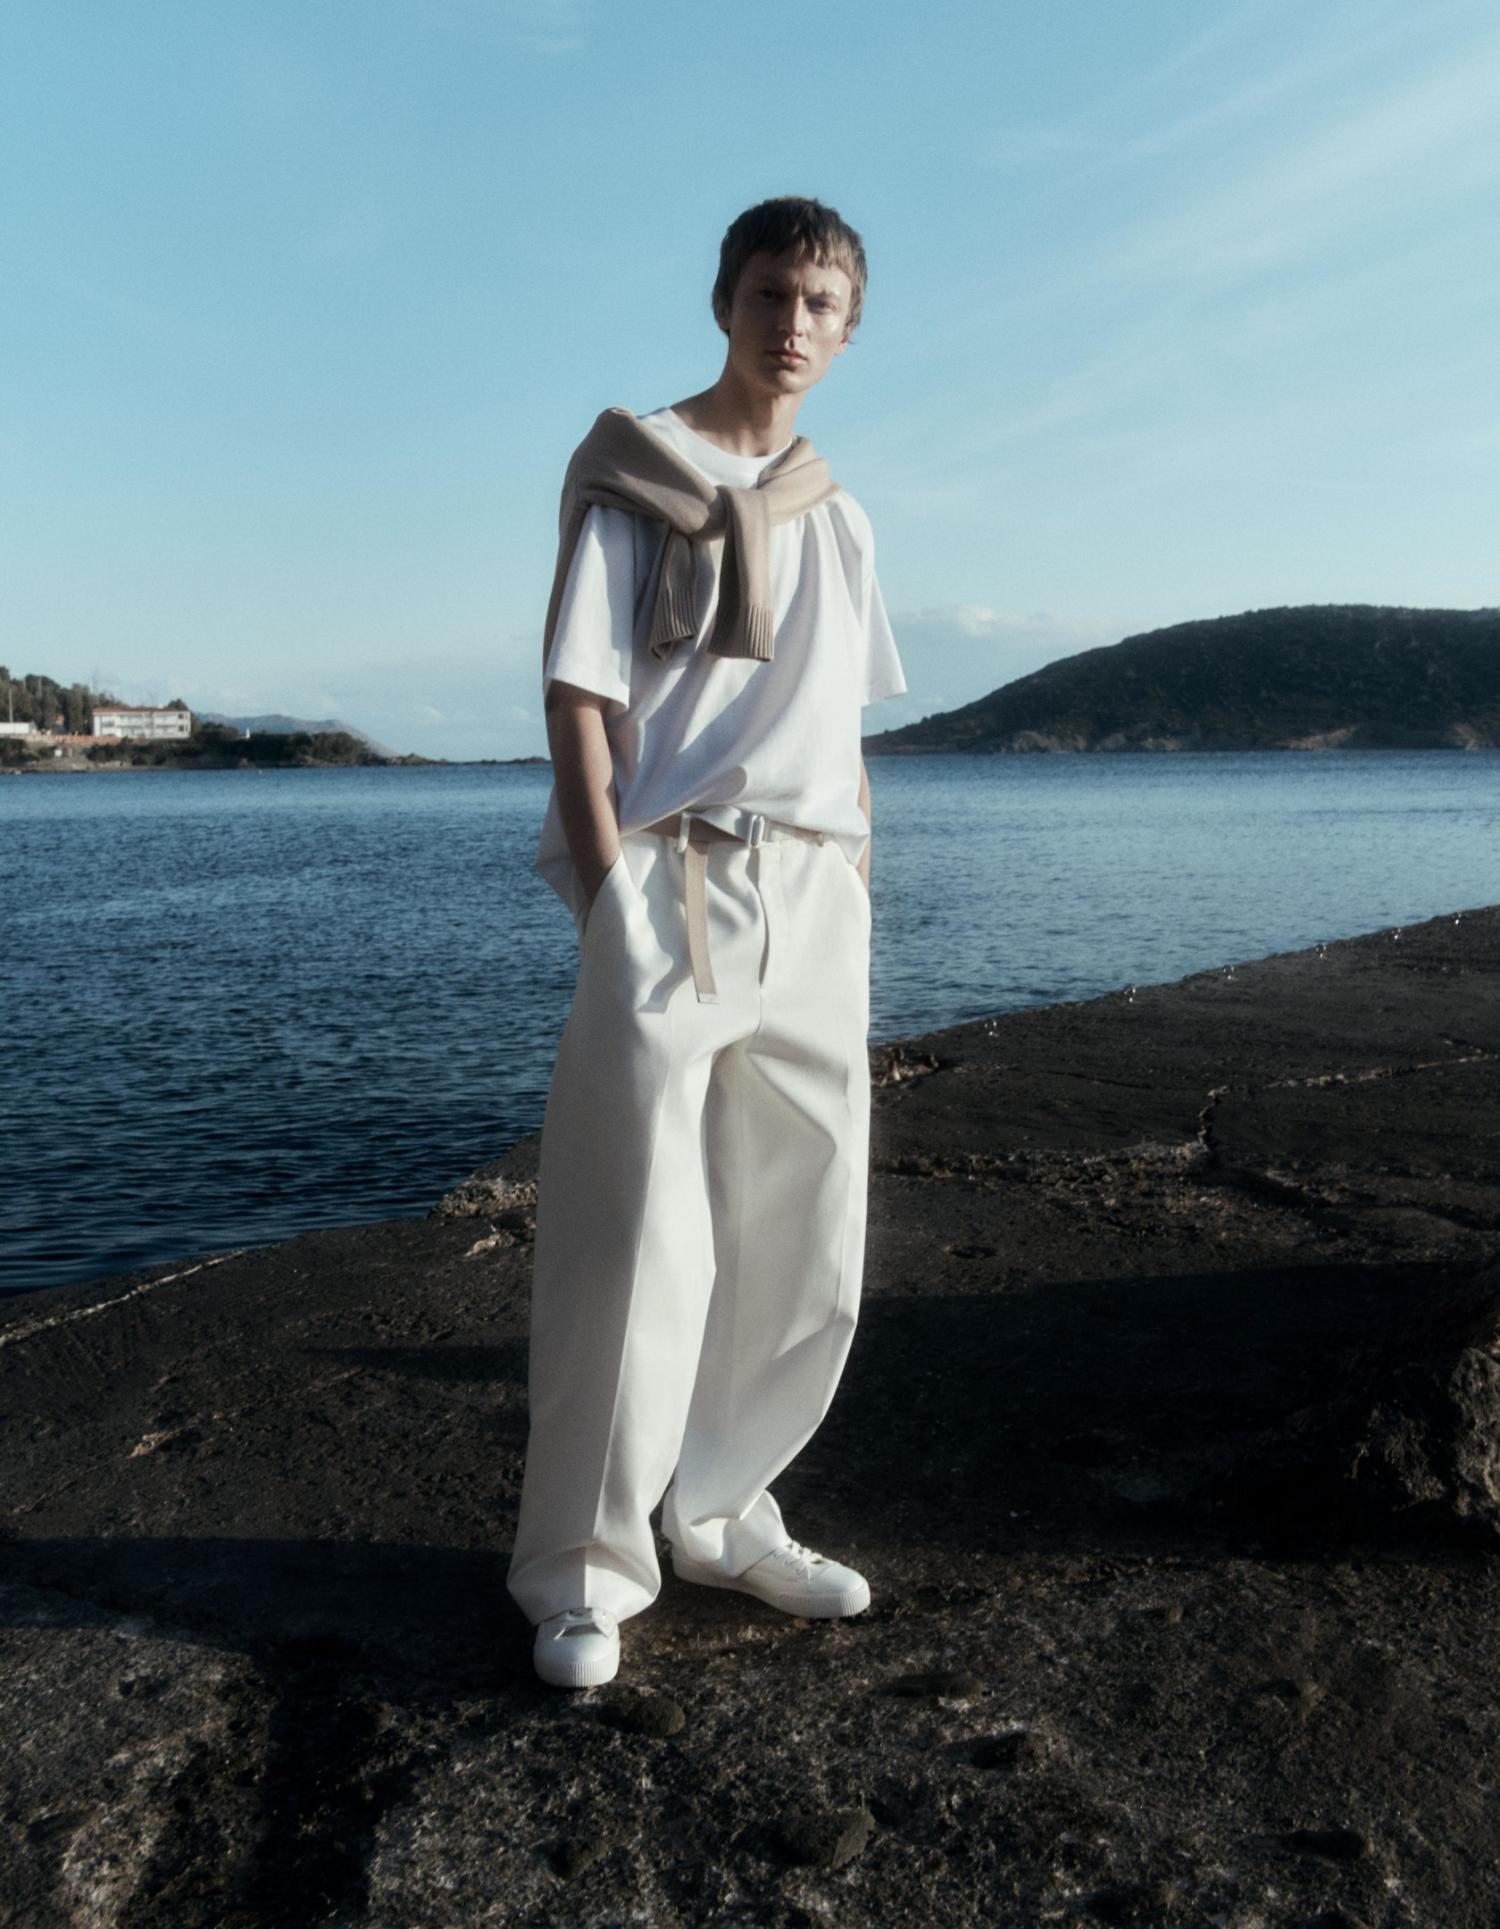 Jonas Gloer by Robin Galiegue for COS Summer 2021 Ad Campaign. Clothing & Accessories: COS WHITE OVERSIZED-FIT T-SHIRT / COS WHITE BEIGE REVERSIBLE BELT / COS WHITE LEATHER LACE-UP SNEAKERS